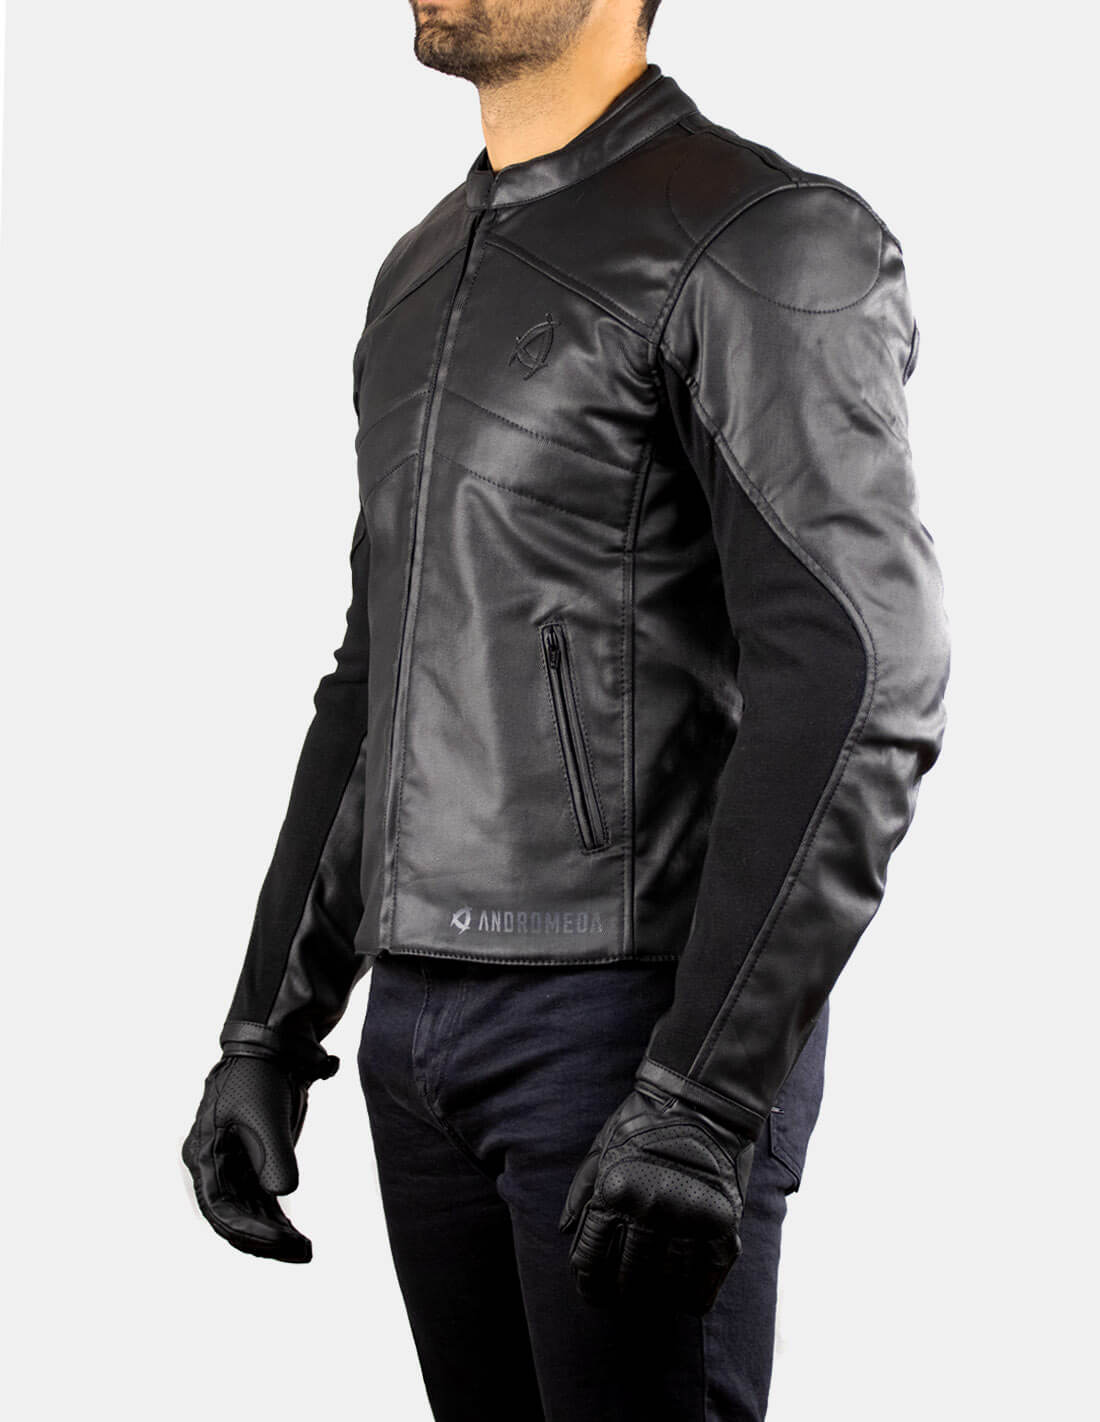 Neowise 2 Non-leather motorcycle jacket